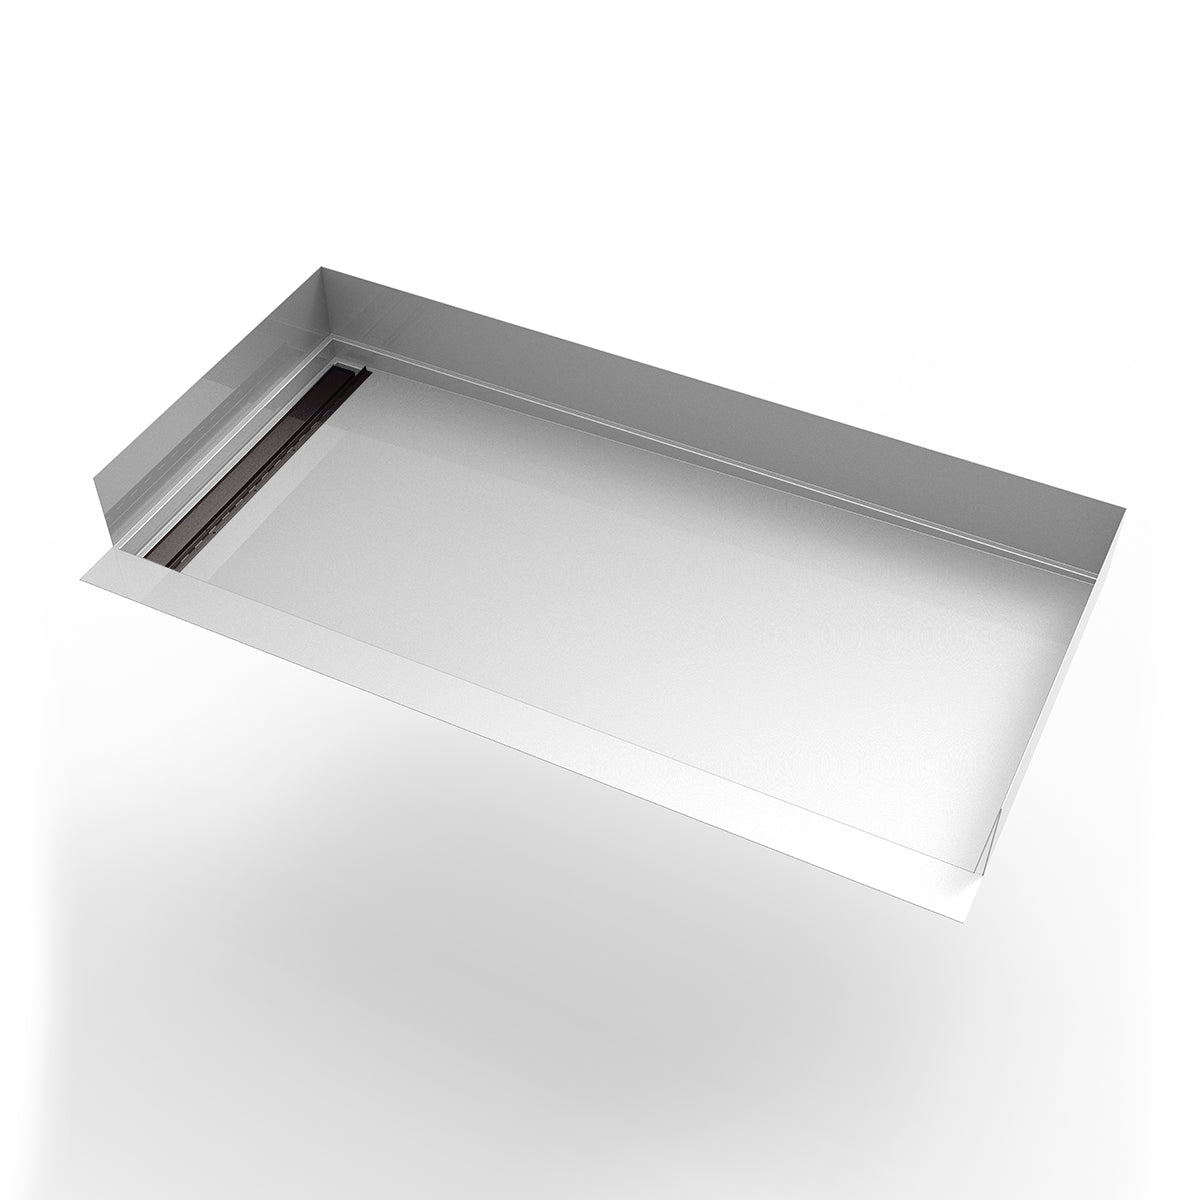 Infinity Drain 30"x 60" Curbless Stainless Steel Shower Base with Left Wall Tile Insert Linear Drain location